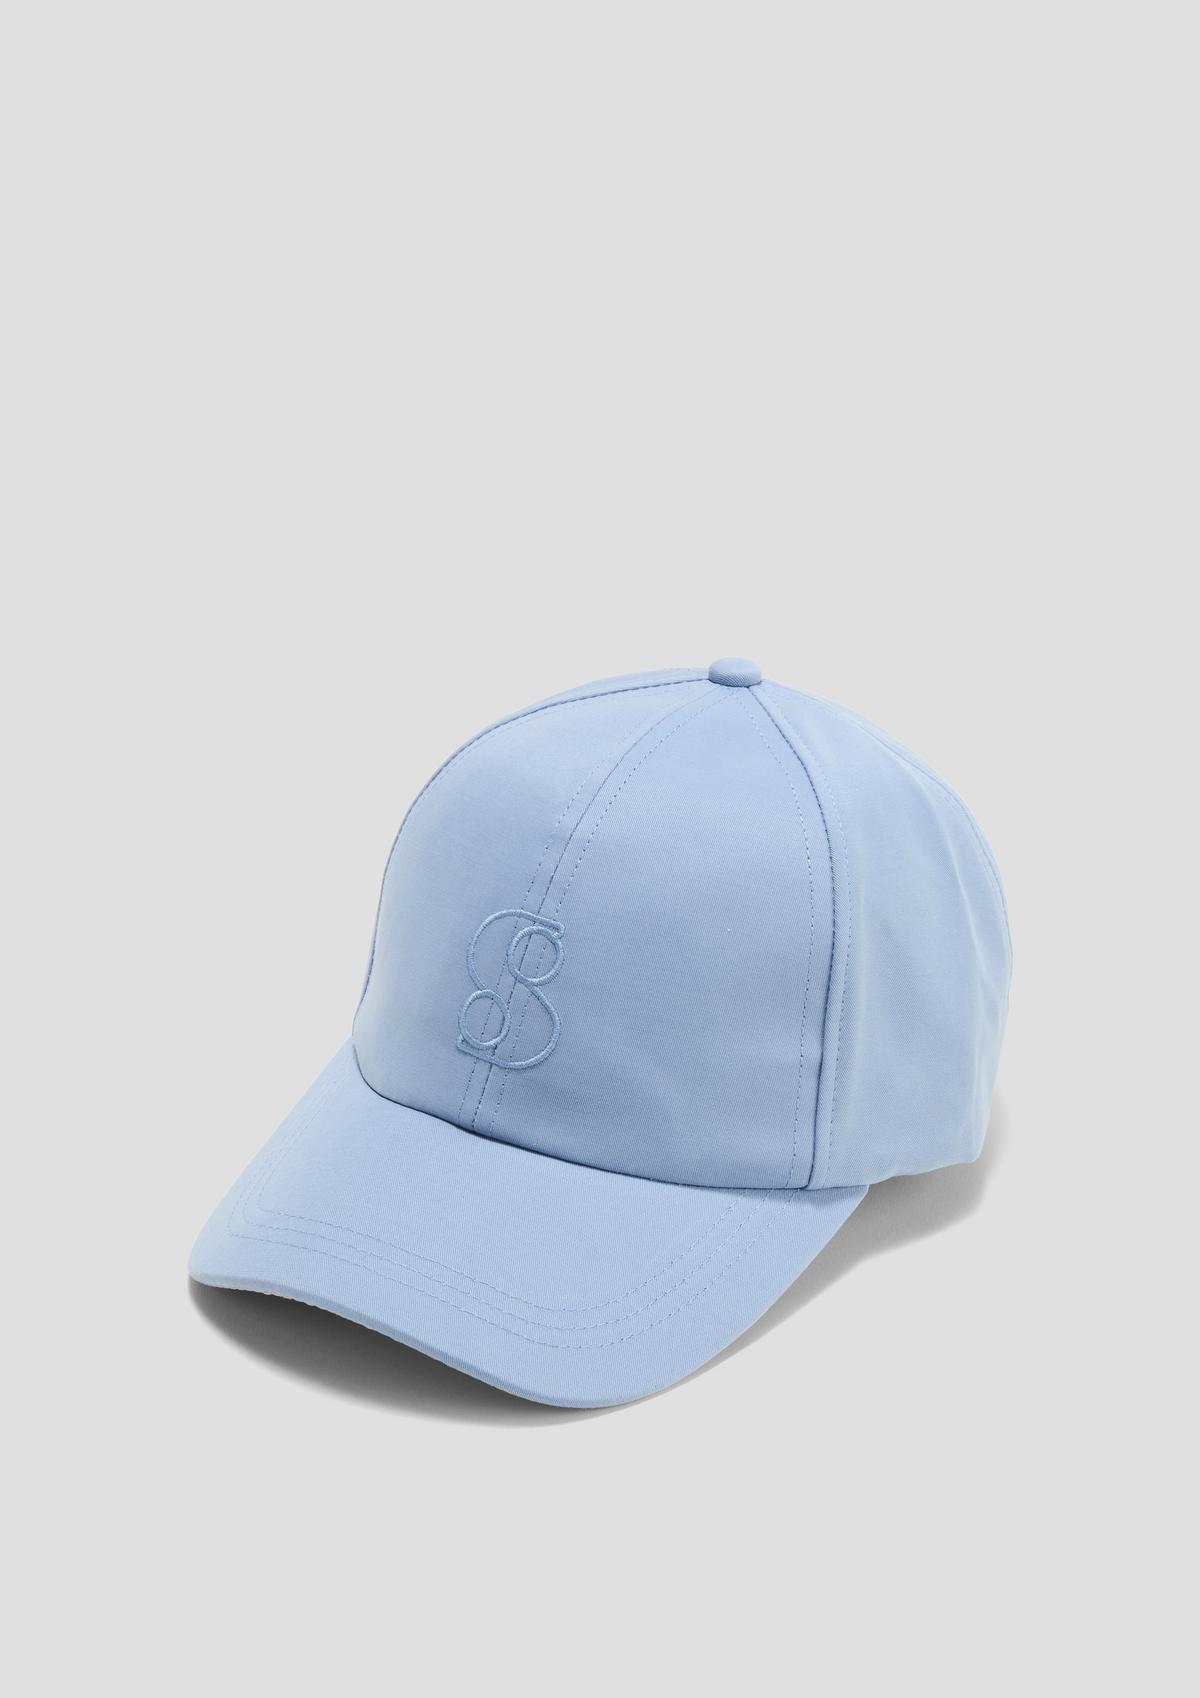 s.Oliver Cap with label embroidery